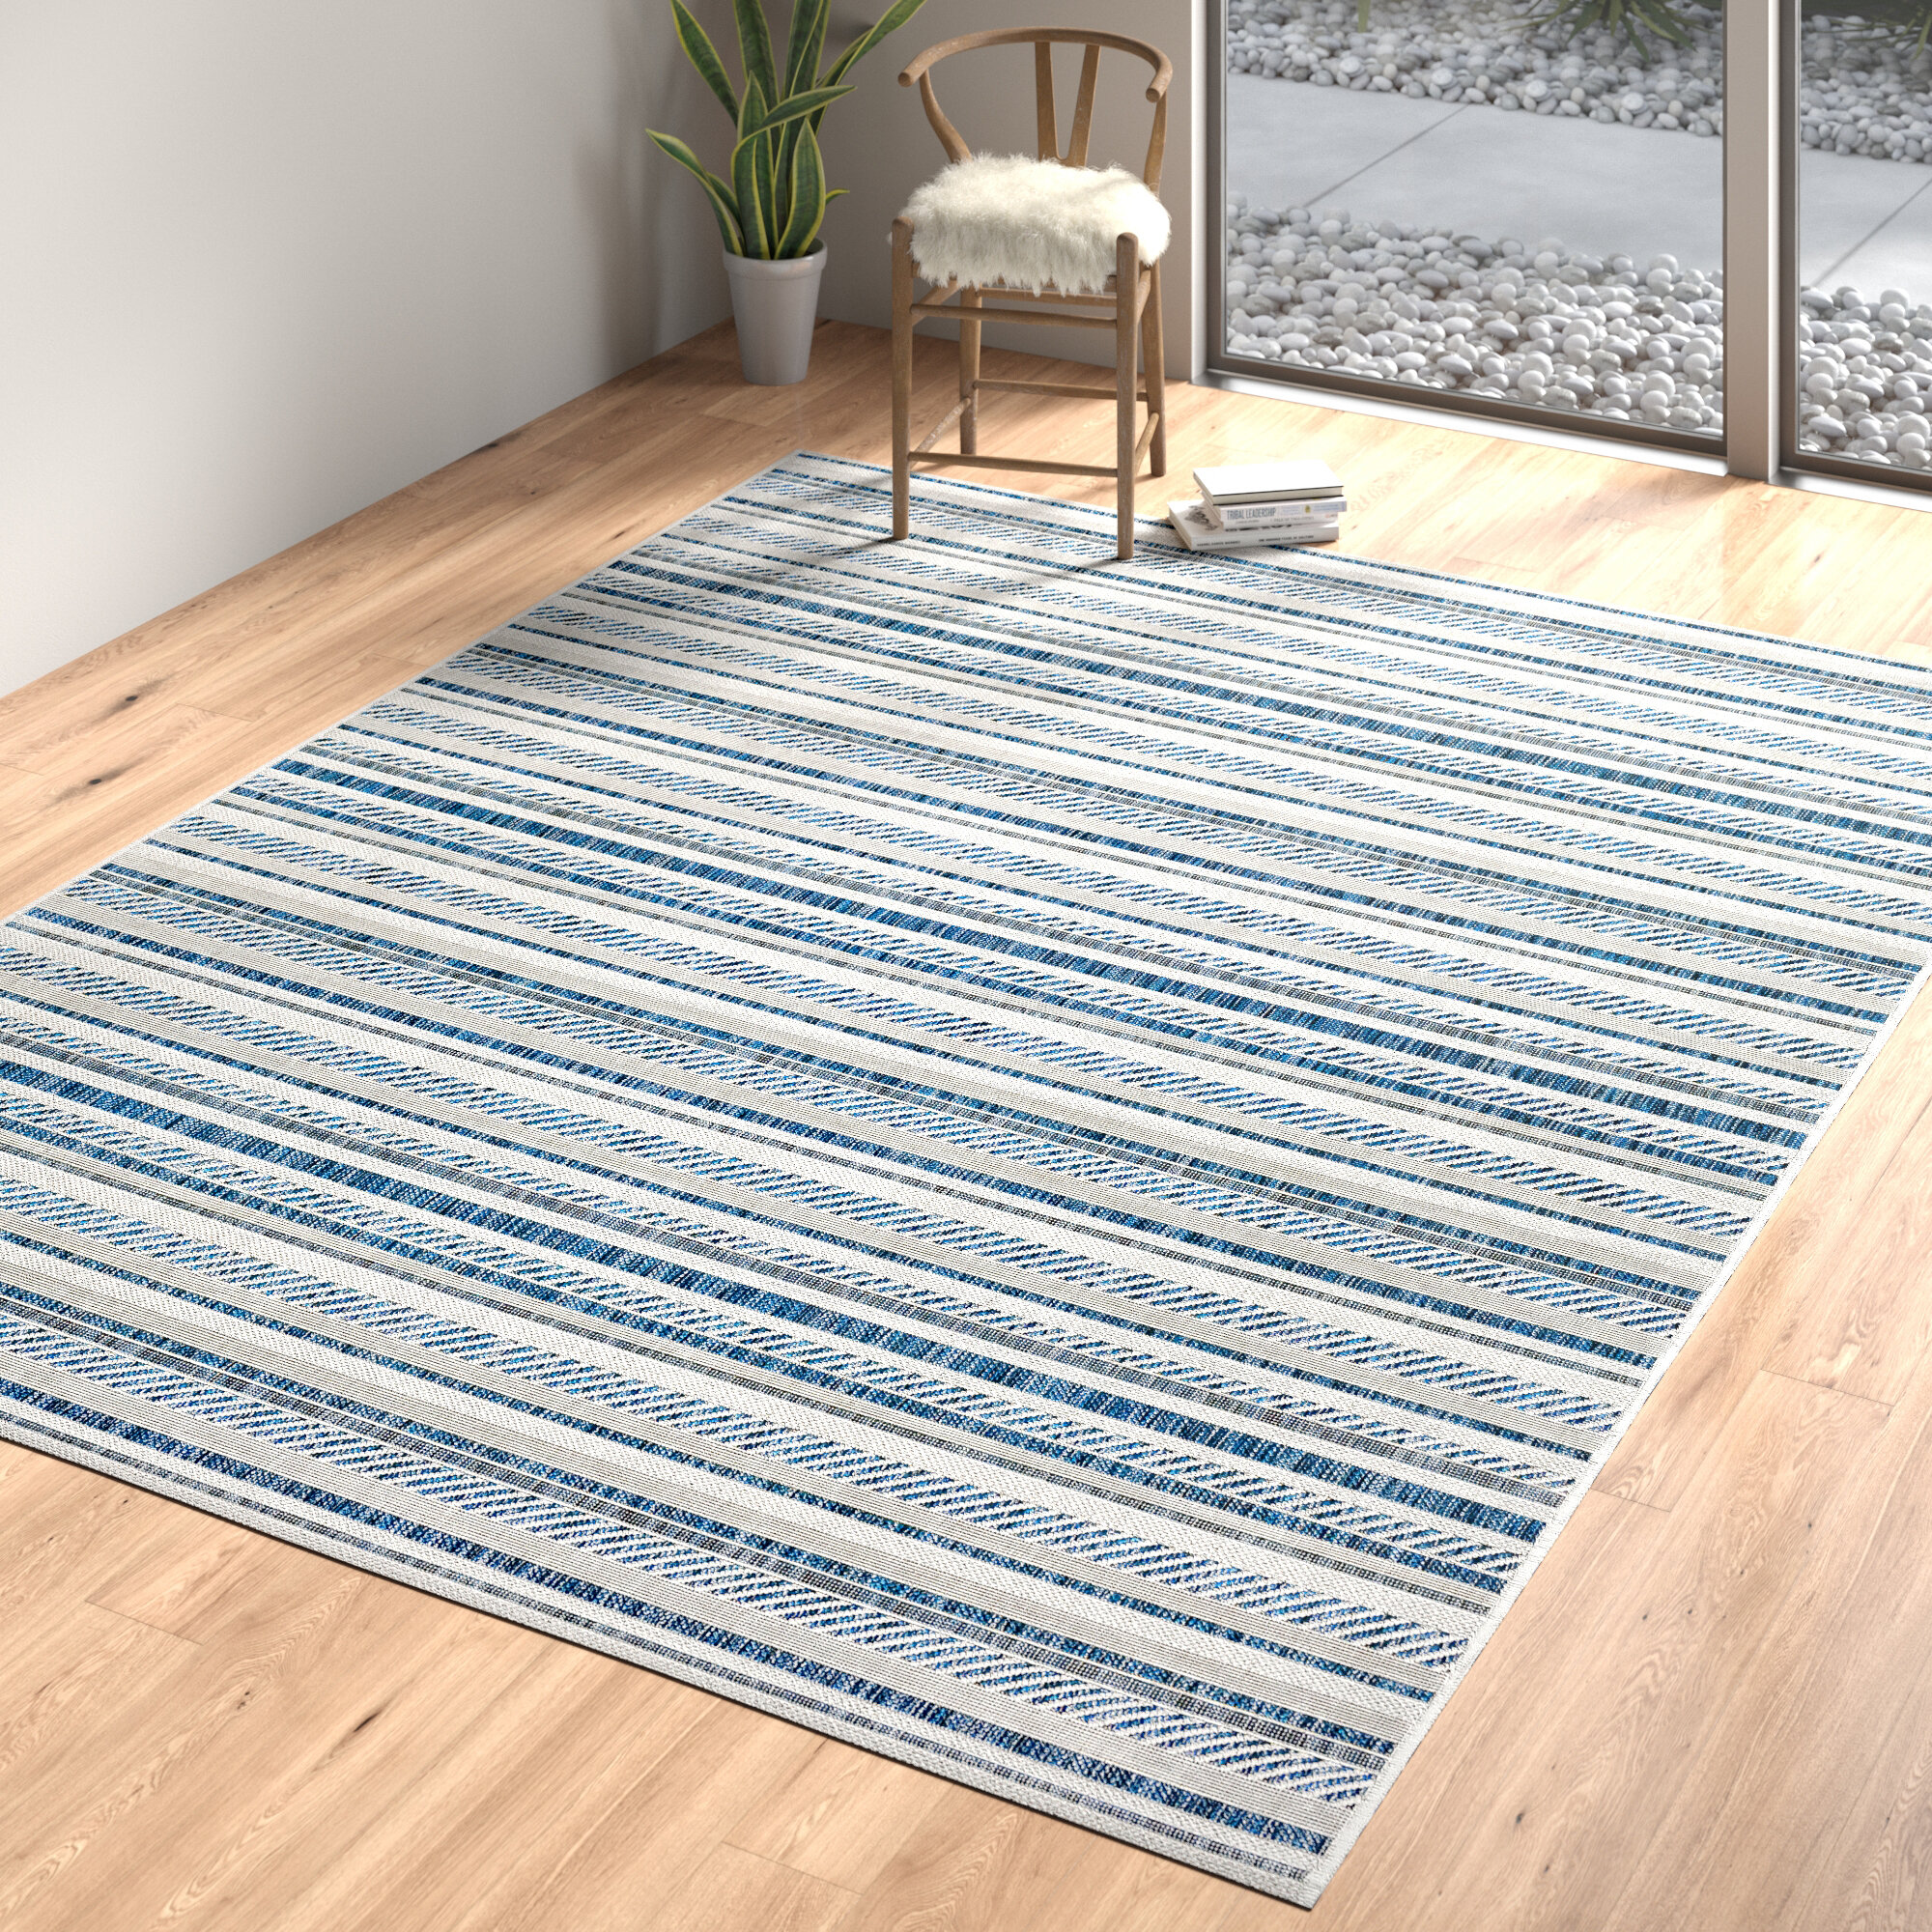 GREY YELLOW BLUE MULTI NEW LARGE QUALITY MODERN THICK SALE CLEARANCE RUG RUNNER 